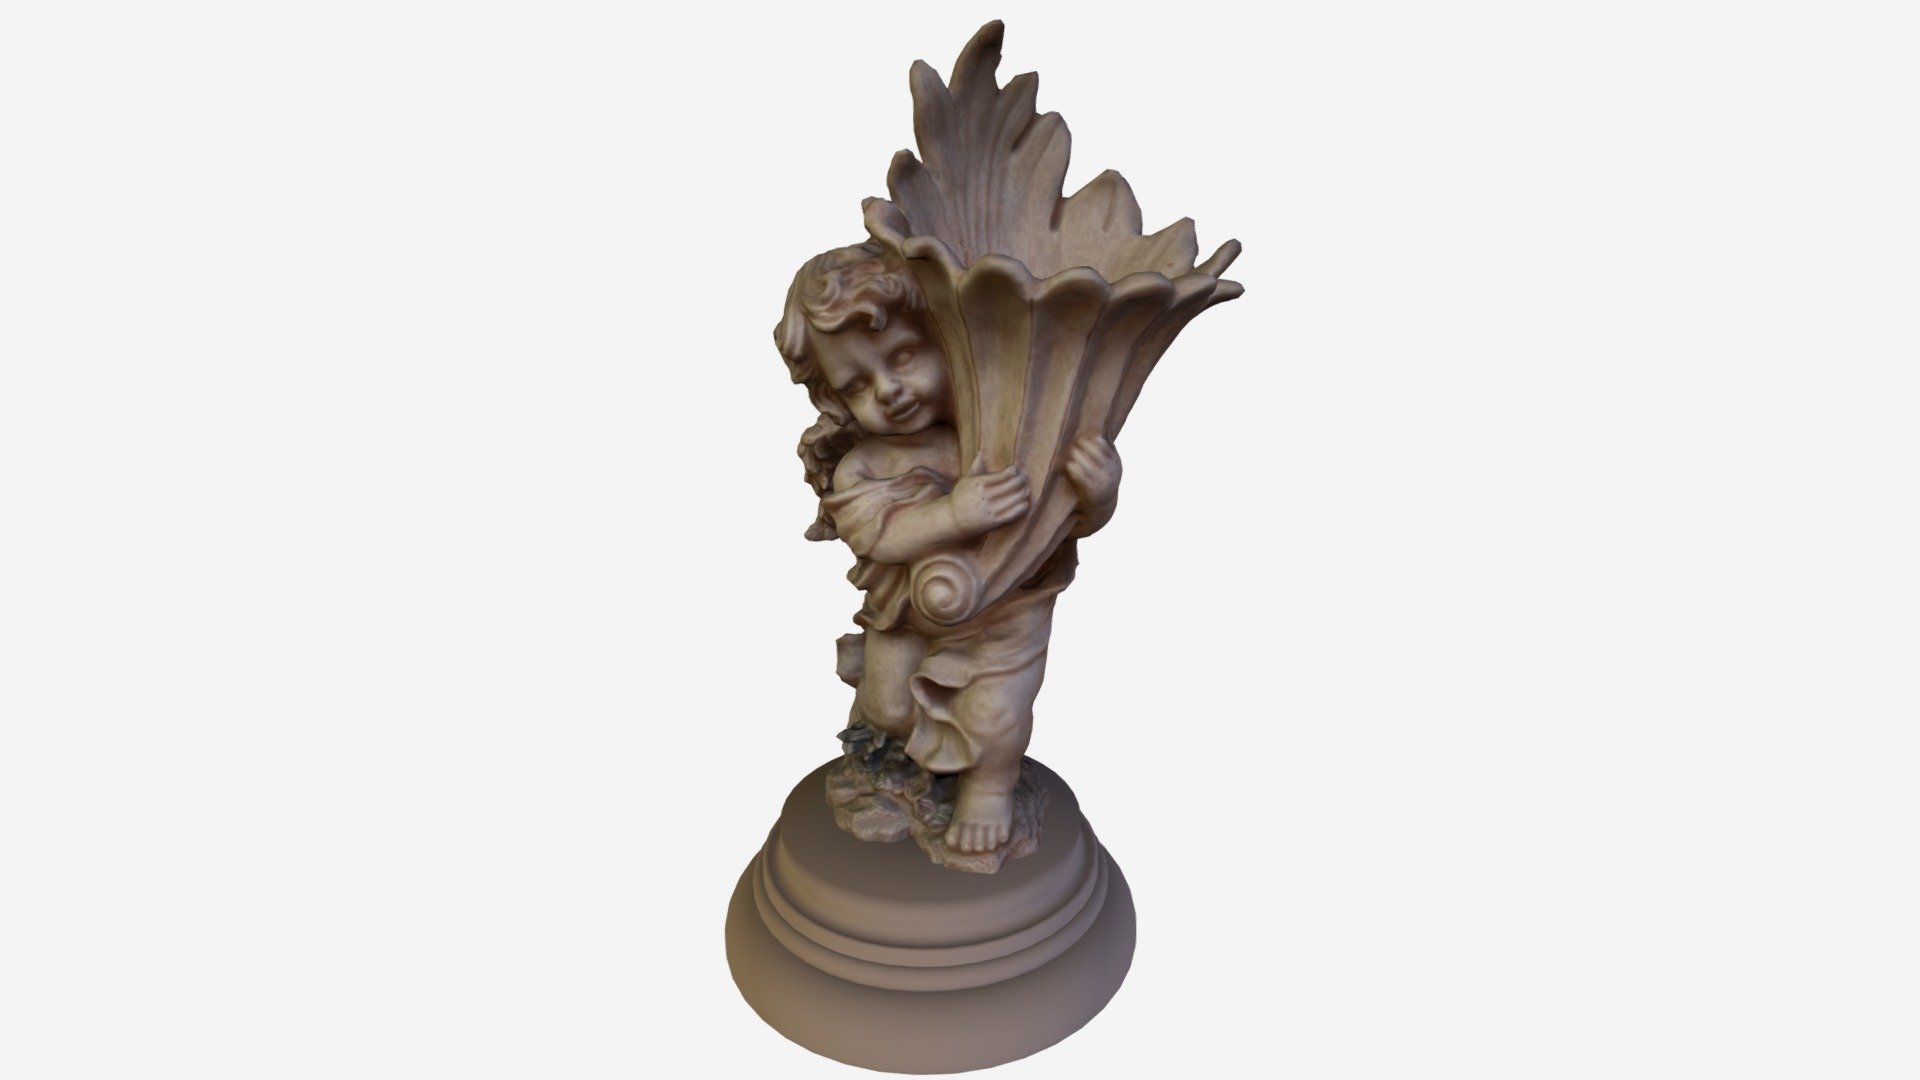 This 3D scan depicts a cherub standing on a roman doric base and carrying a flower shaped vase 3d model